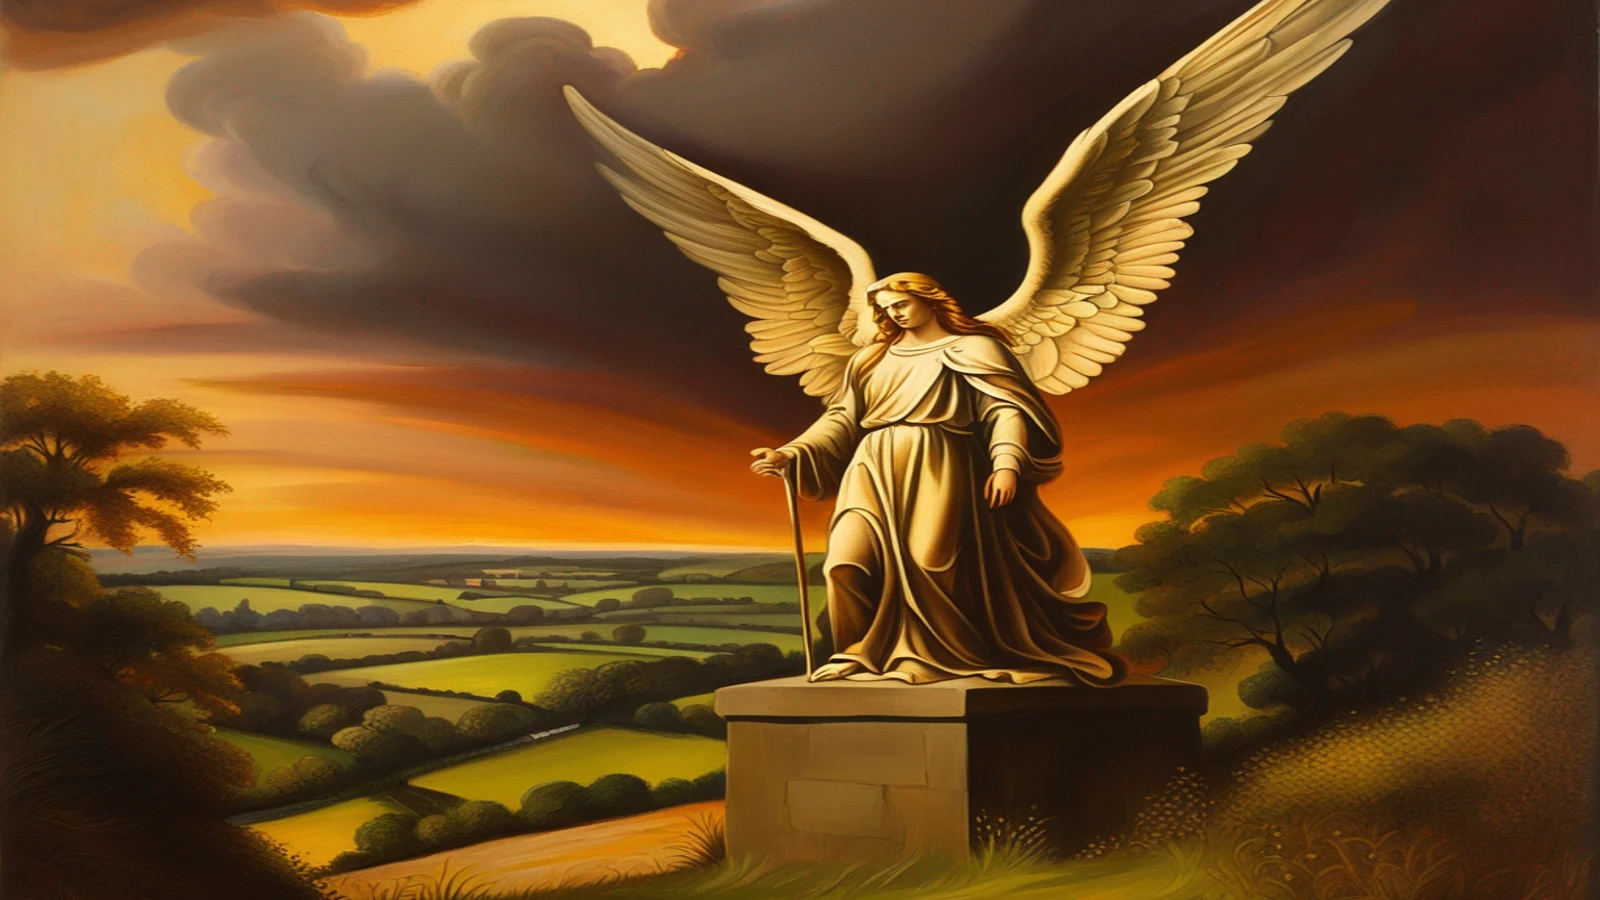 a_towering_archangel_over_an_idyllic_rural_scene_in_England_